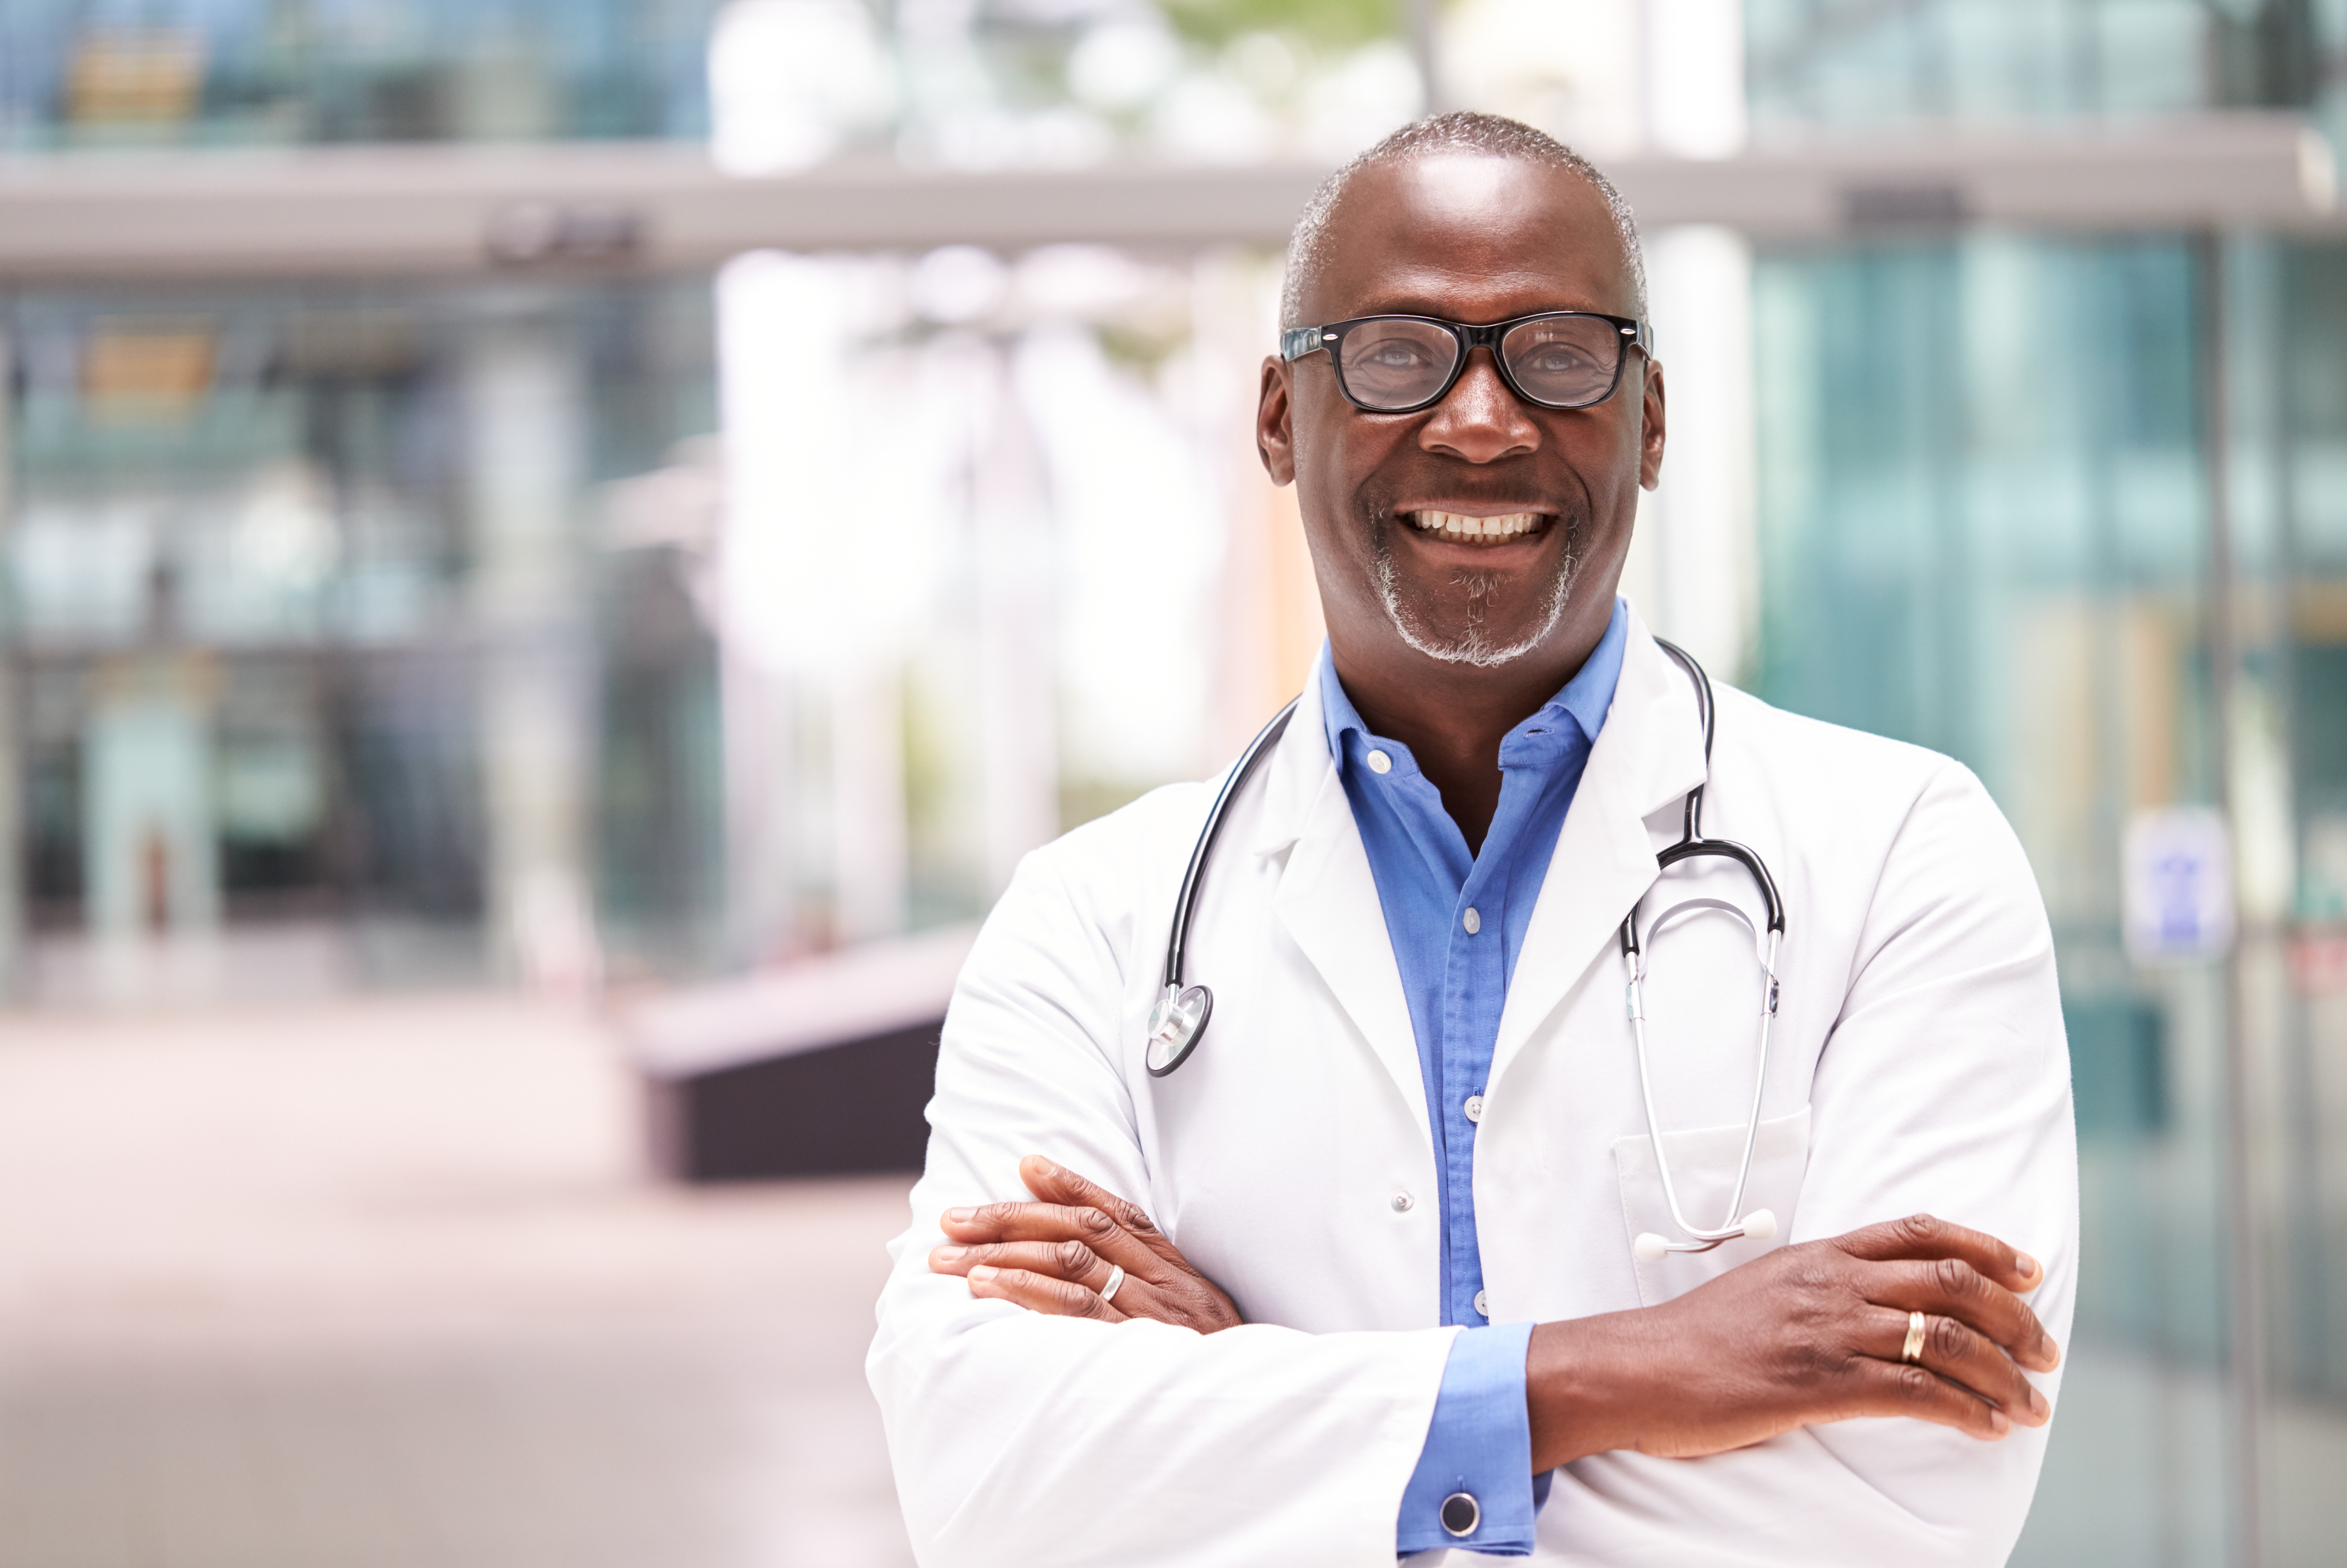 Portrait Of Male Doctor With Stethoscope Wearing White Coat Standing In Modern Hospital Building